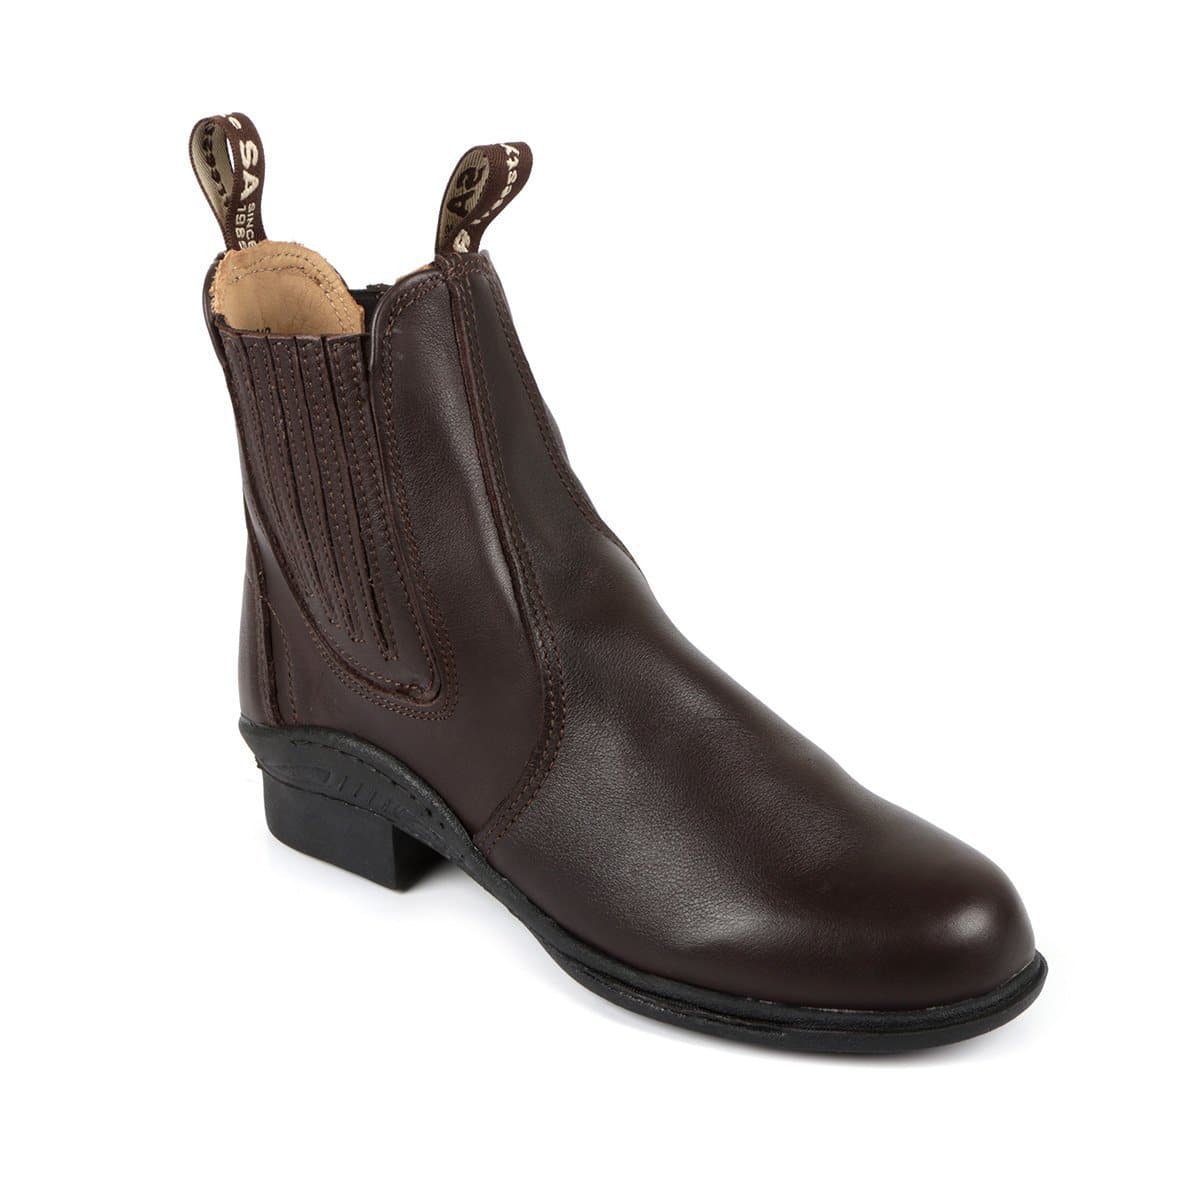 Henrietta Equestrian Premium Water-resistant leather - Freestyle SA Proudly local leather boots veldskoens vellies leather shoes suede veldskoens